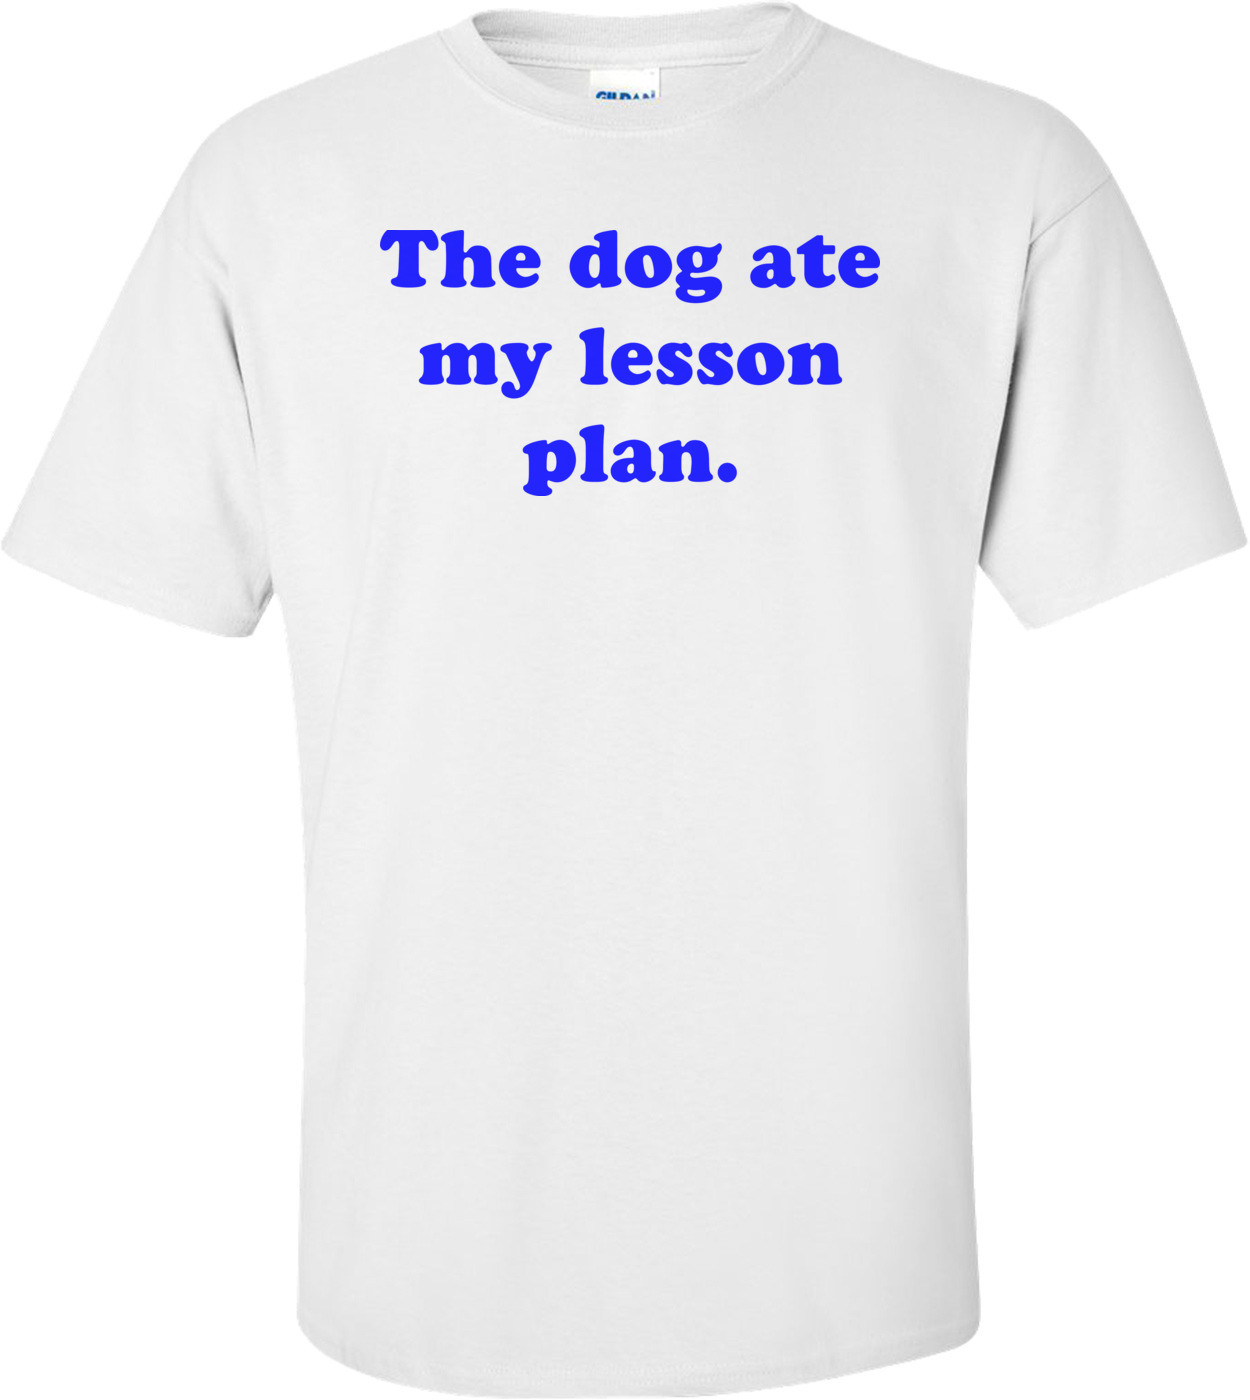 The Dog Ate My Lesson Plan. Shirt